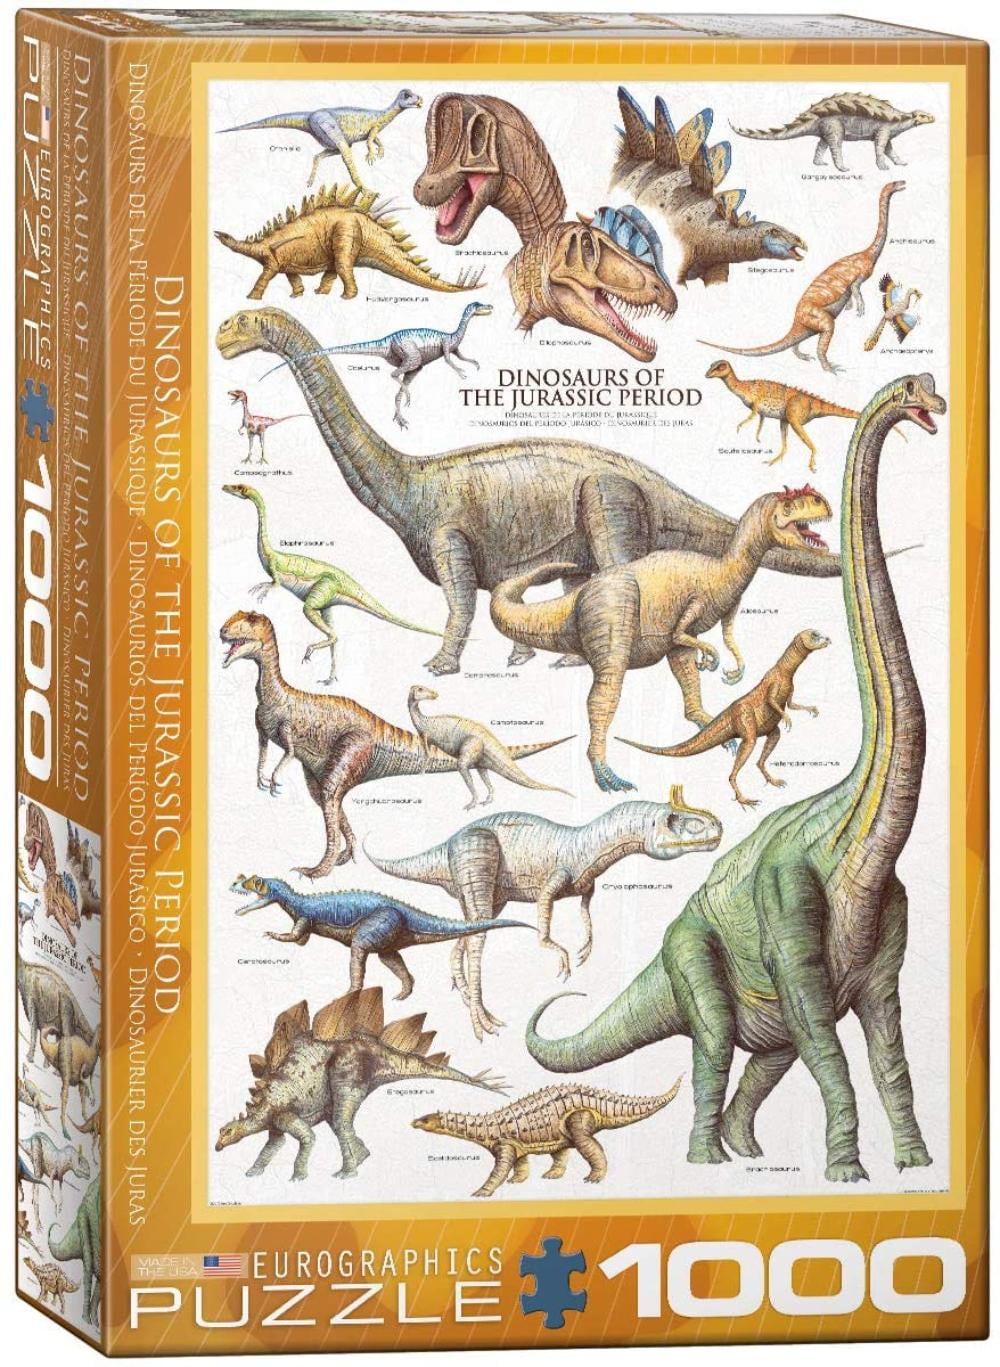 Puzzles for Adults 6000 Piece Strong Dinosaur Every Piece is Unique & Pieces Fit Together Perfectly